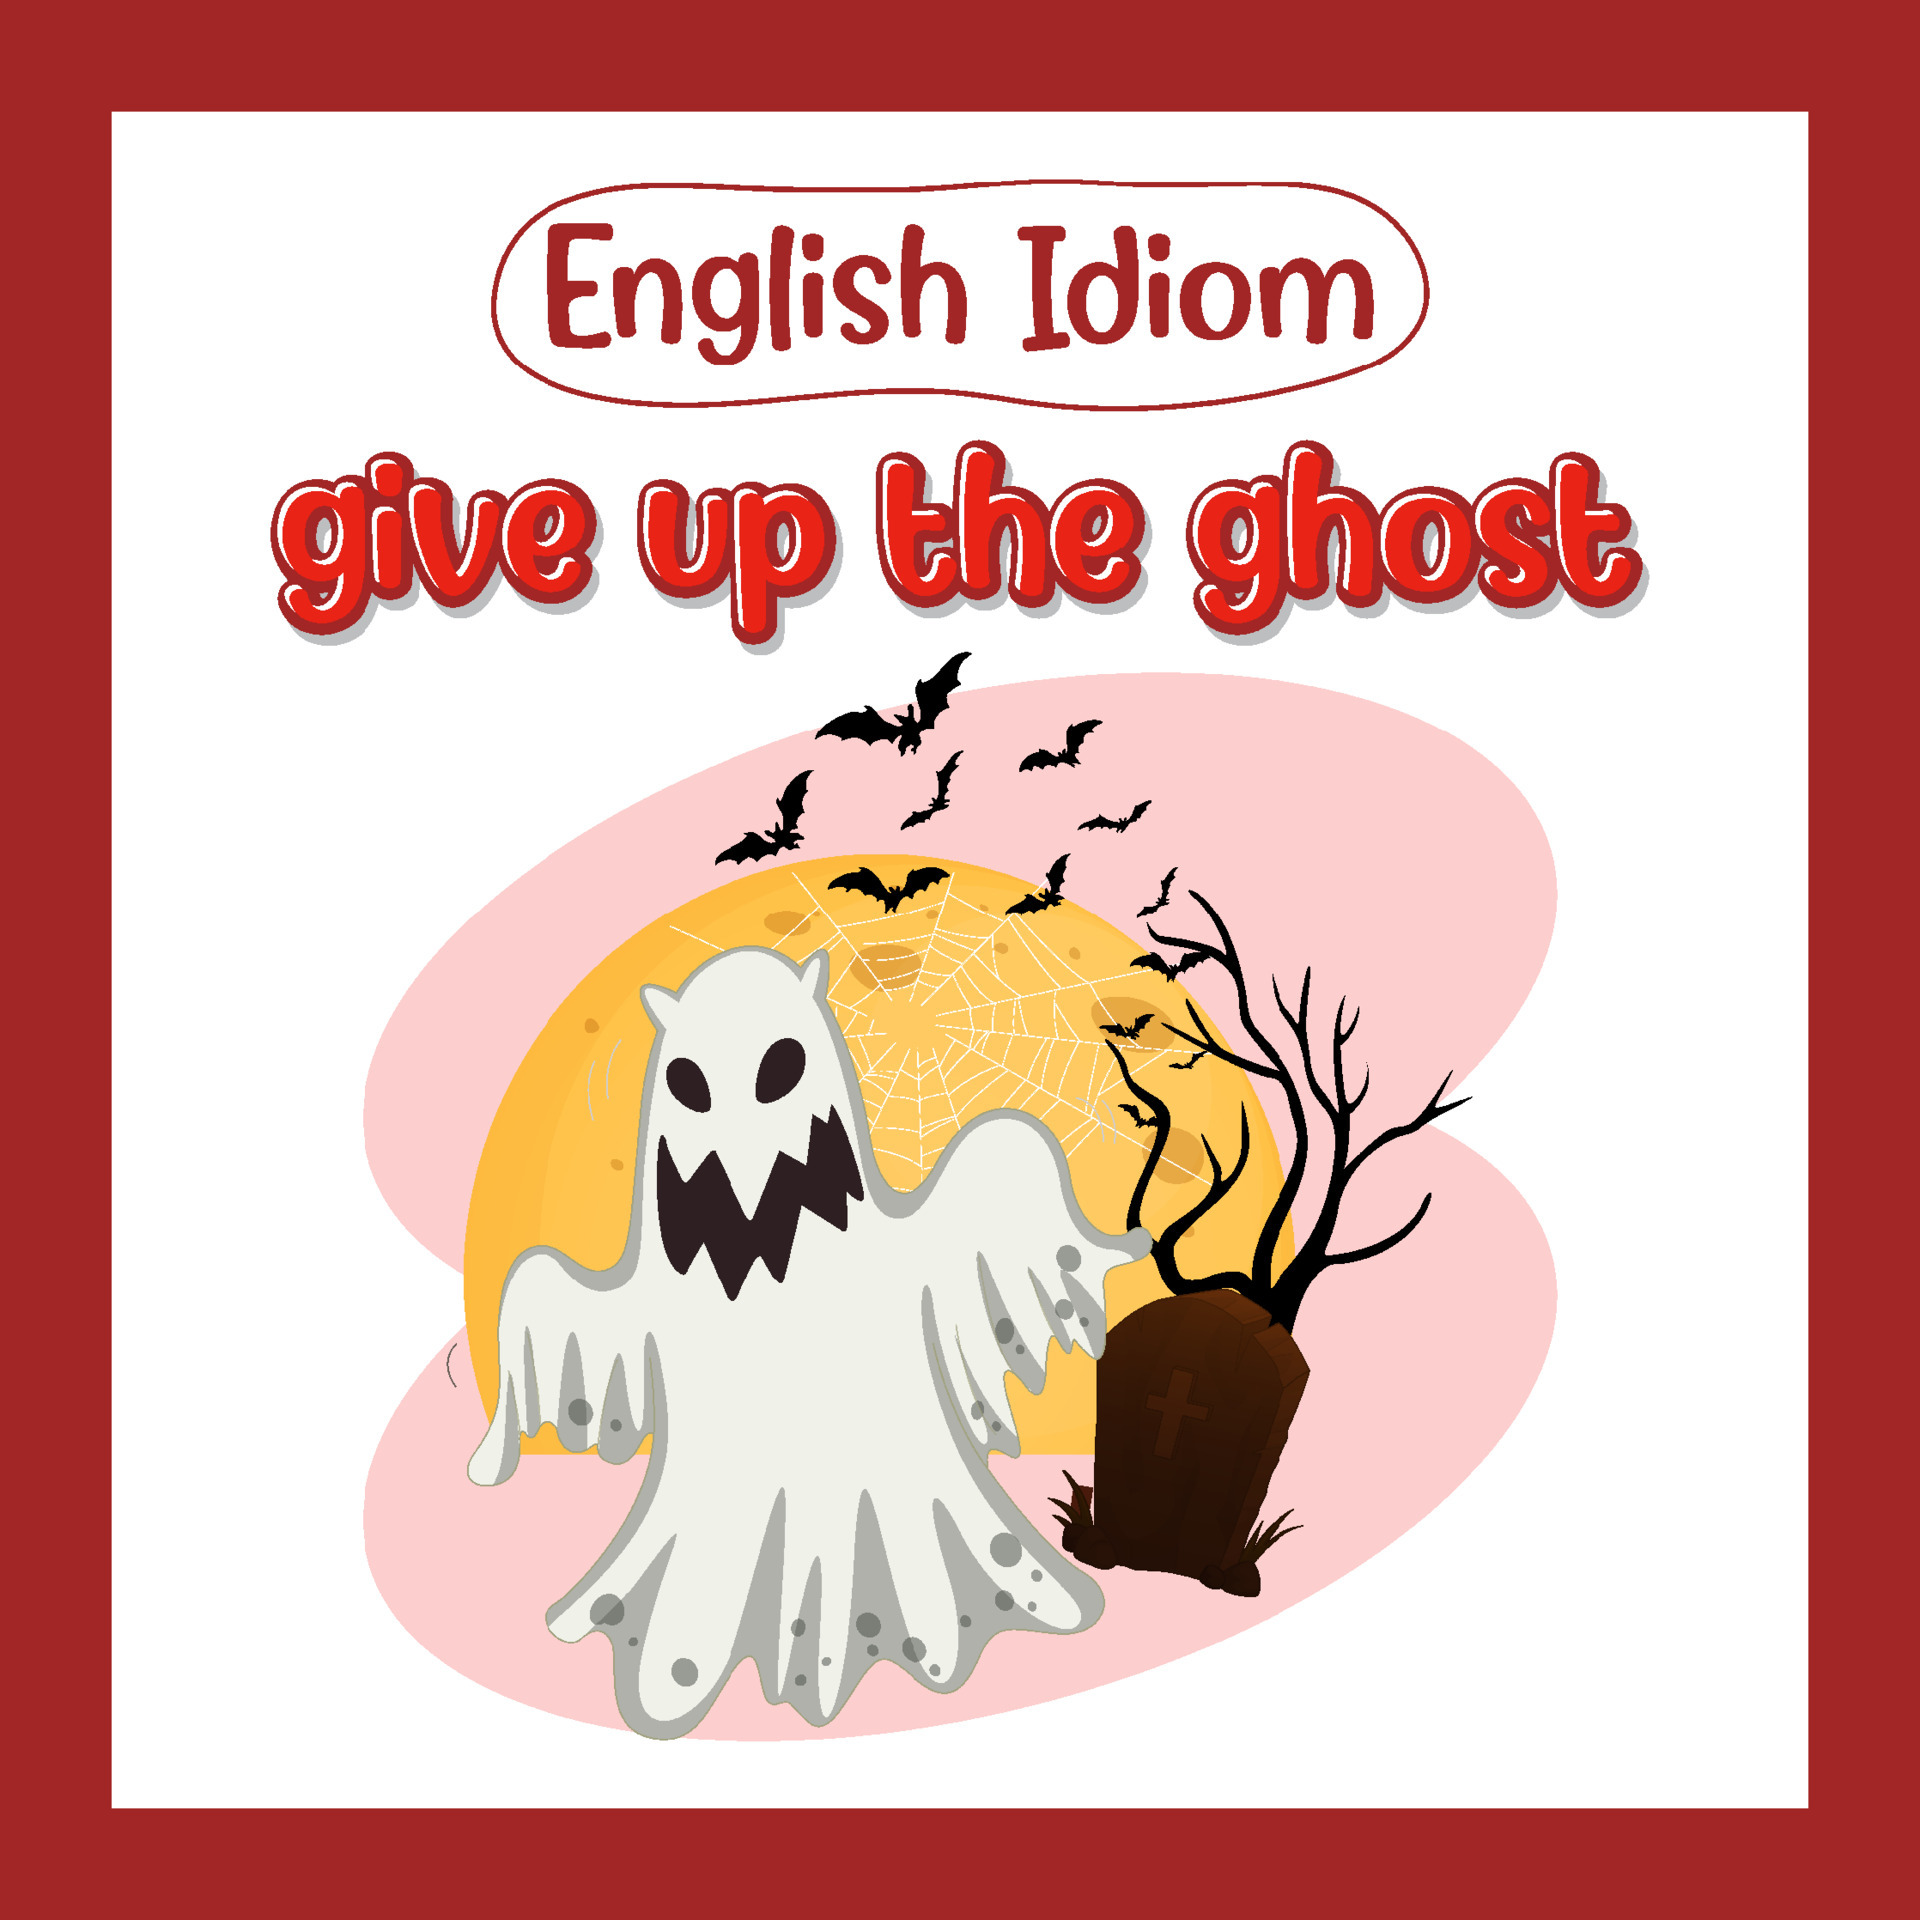 giving up the ghost etymology